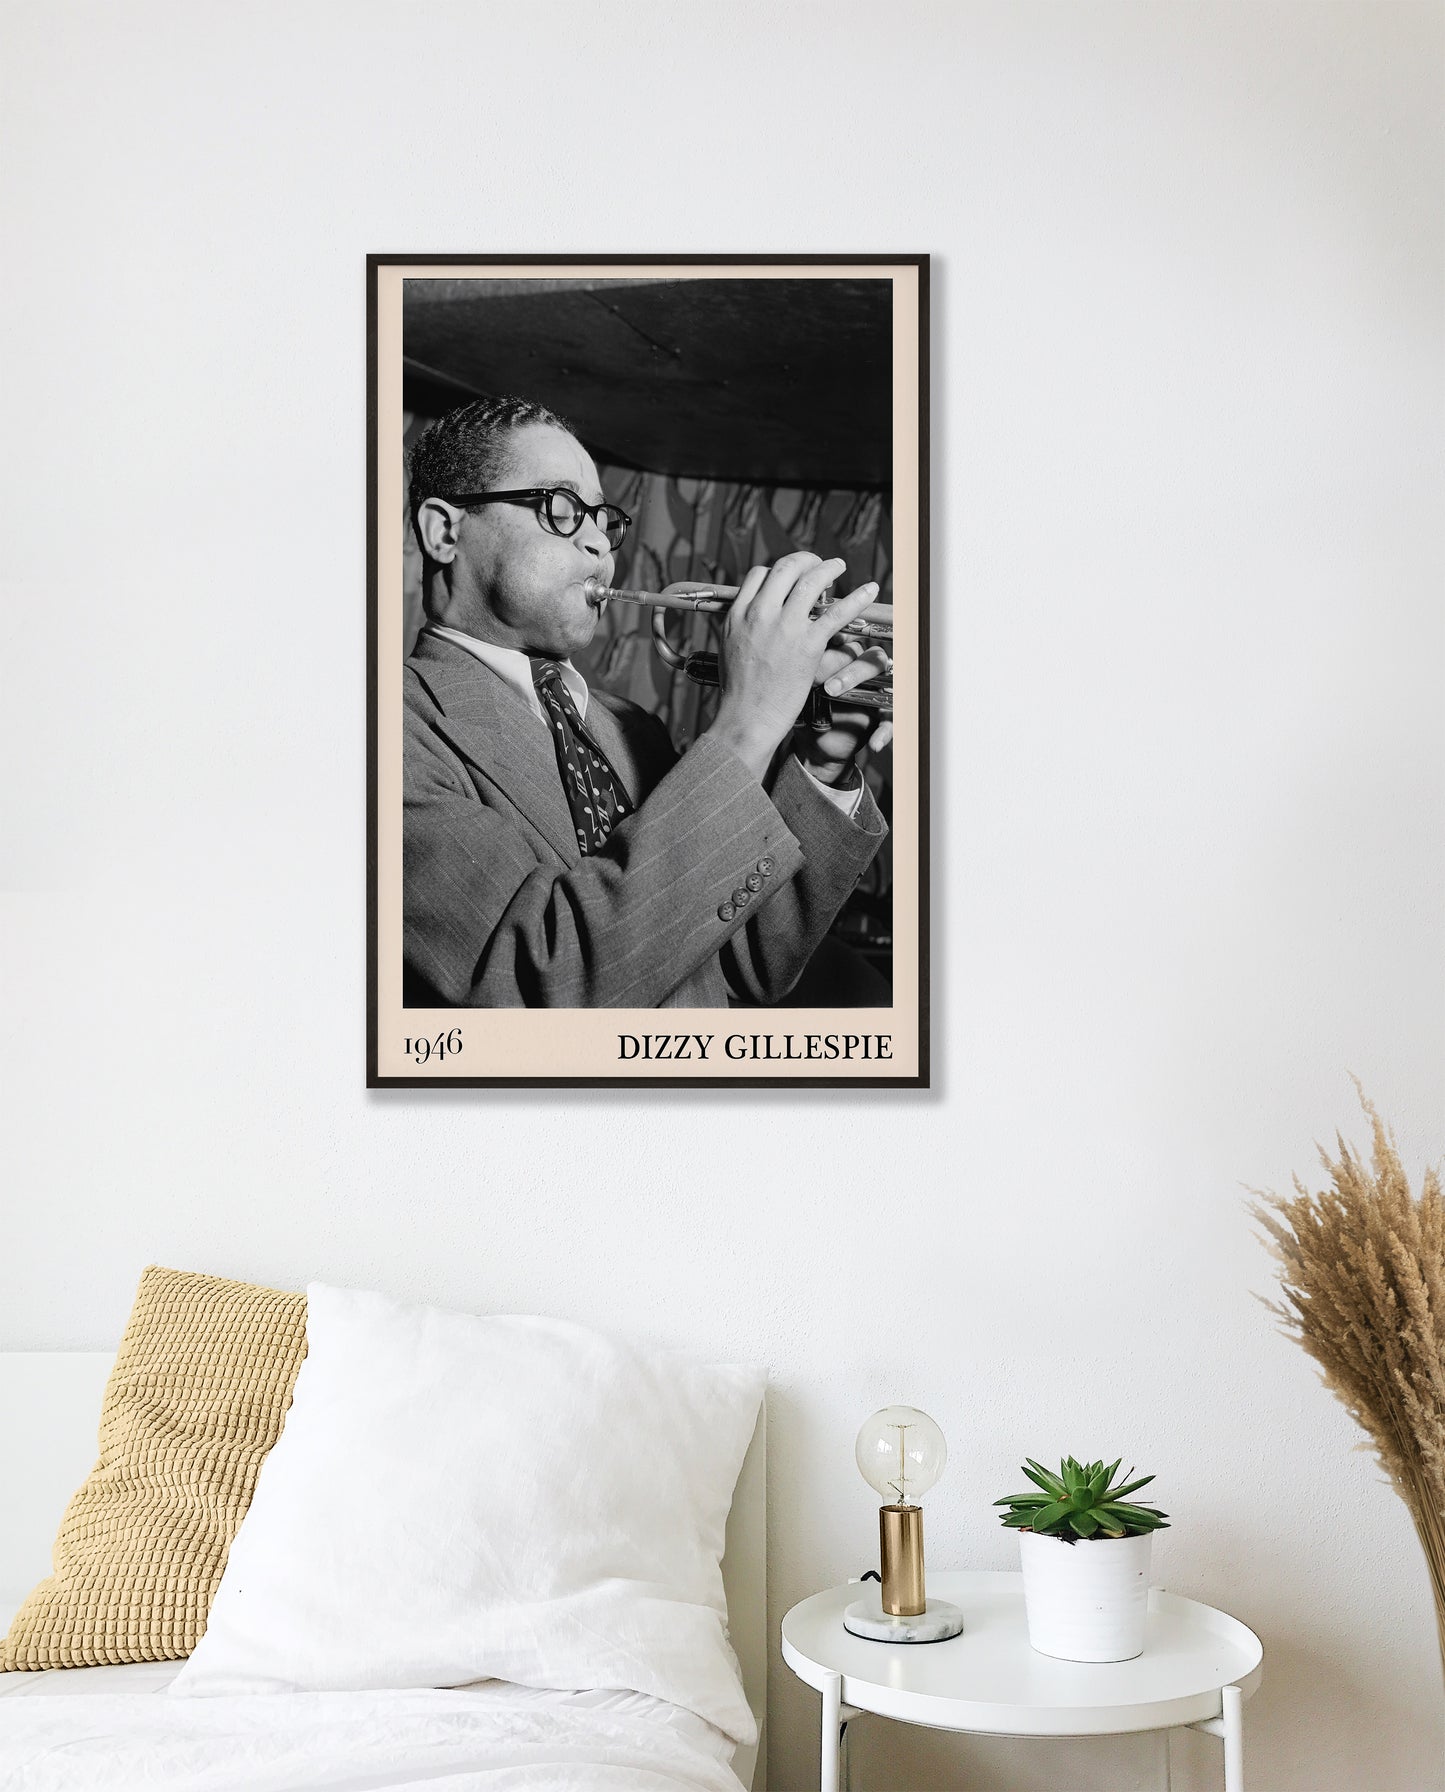 Retro 1946 photo of Dizzy Gillespie crafted into black framed print, hanging on a bedroom wall